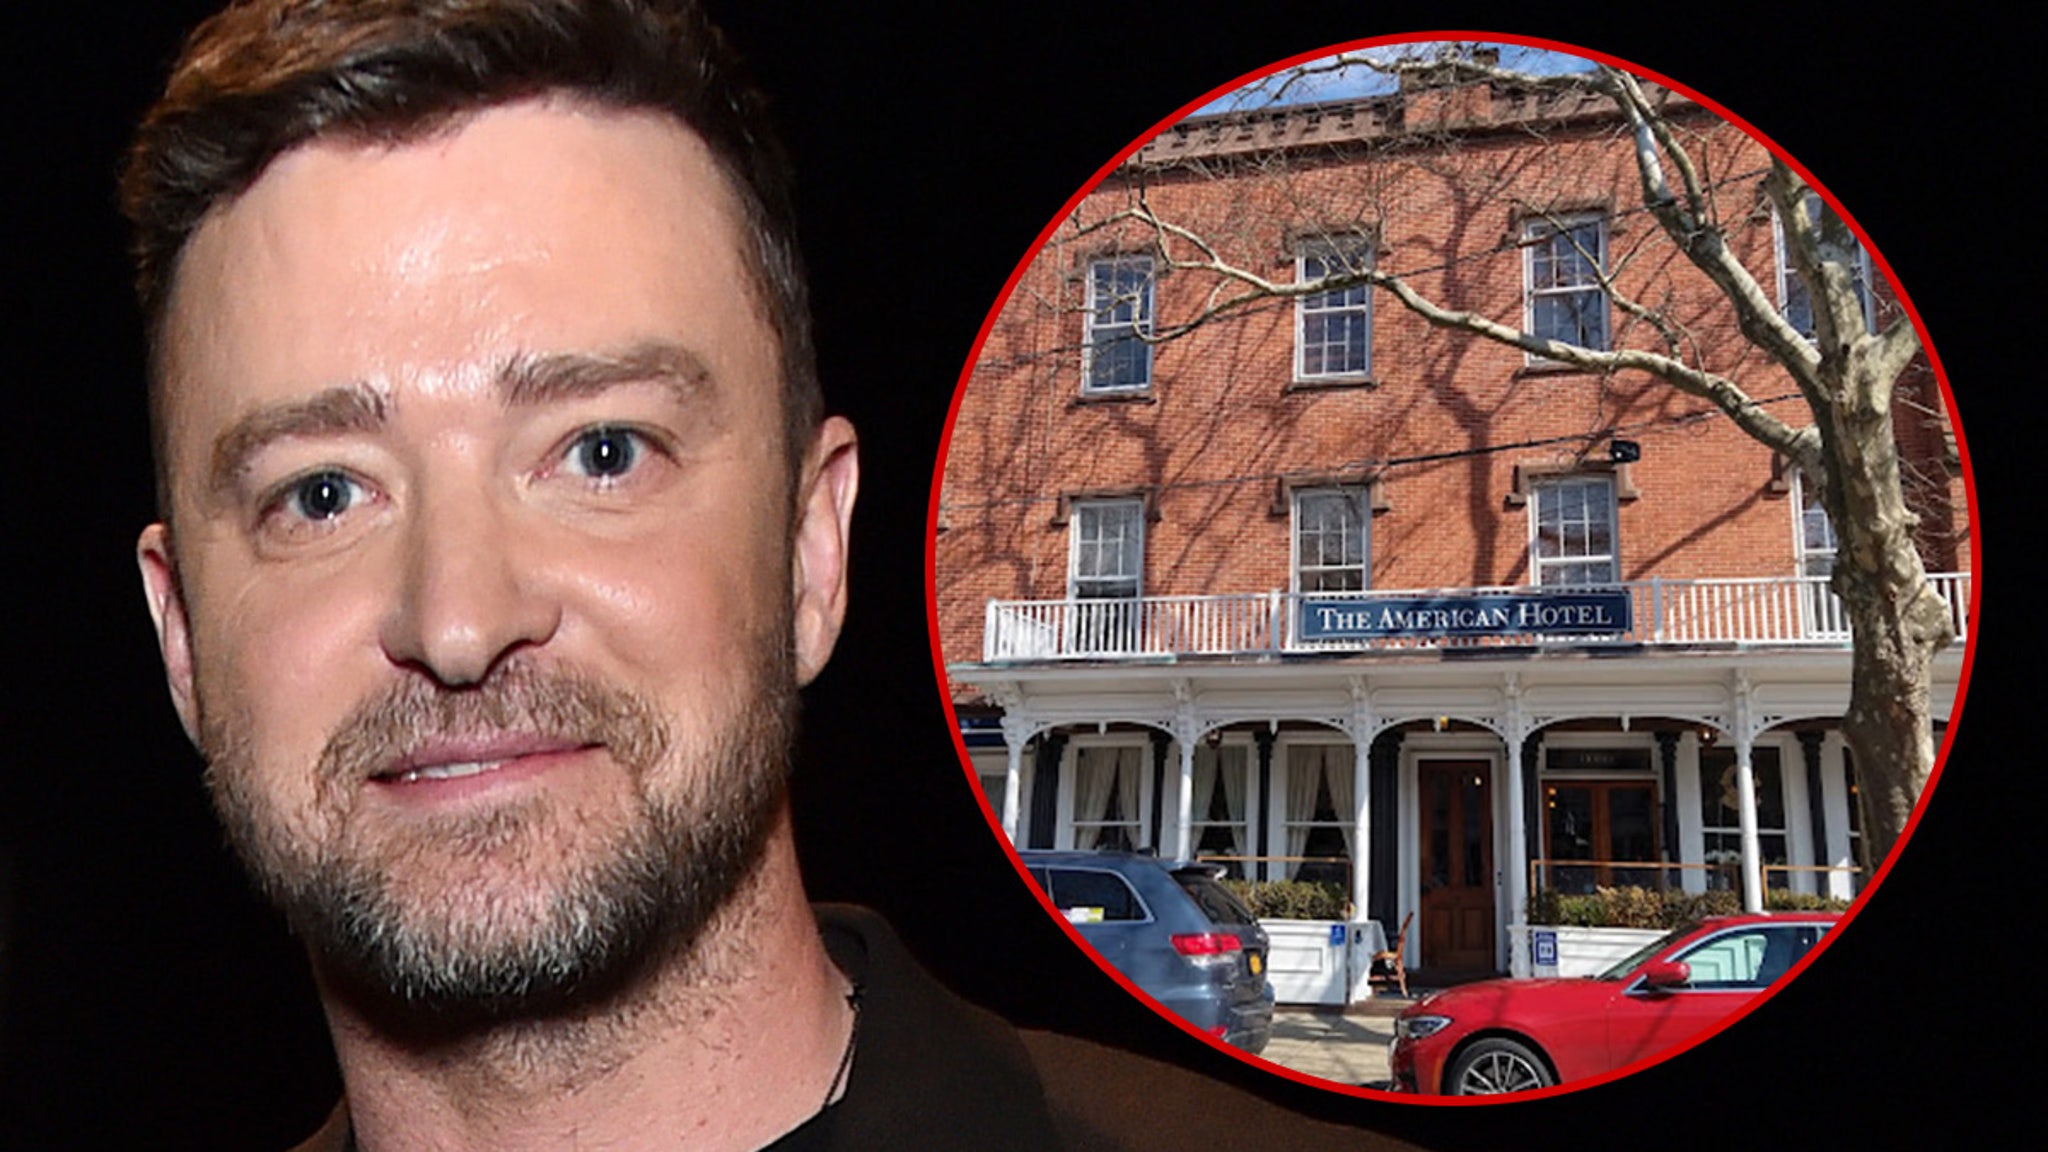 justin-timberlake-welcome-back-at-hotel-where-he-drank-before-dwi-bust